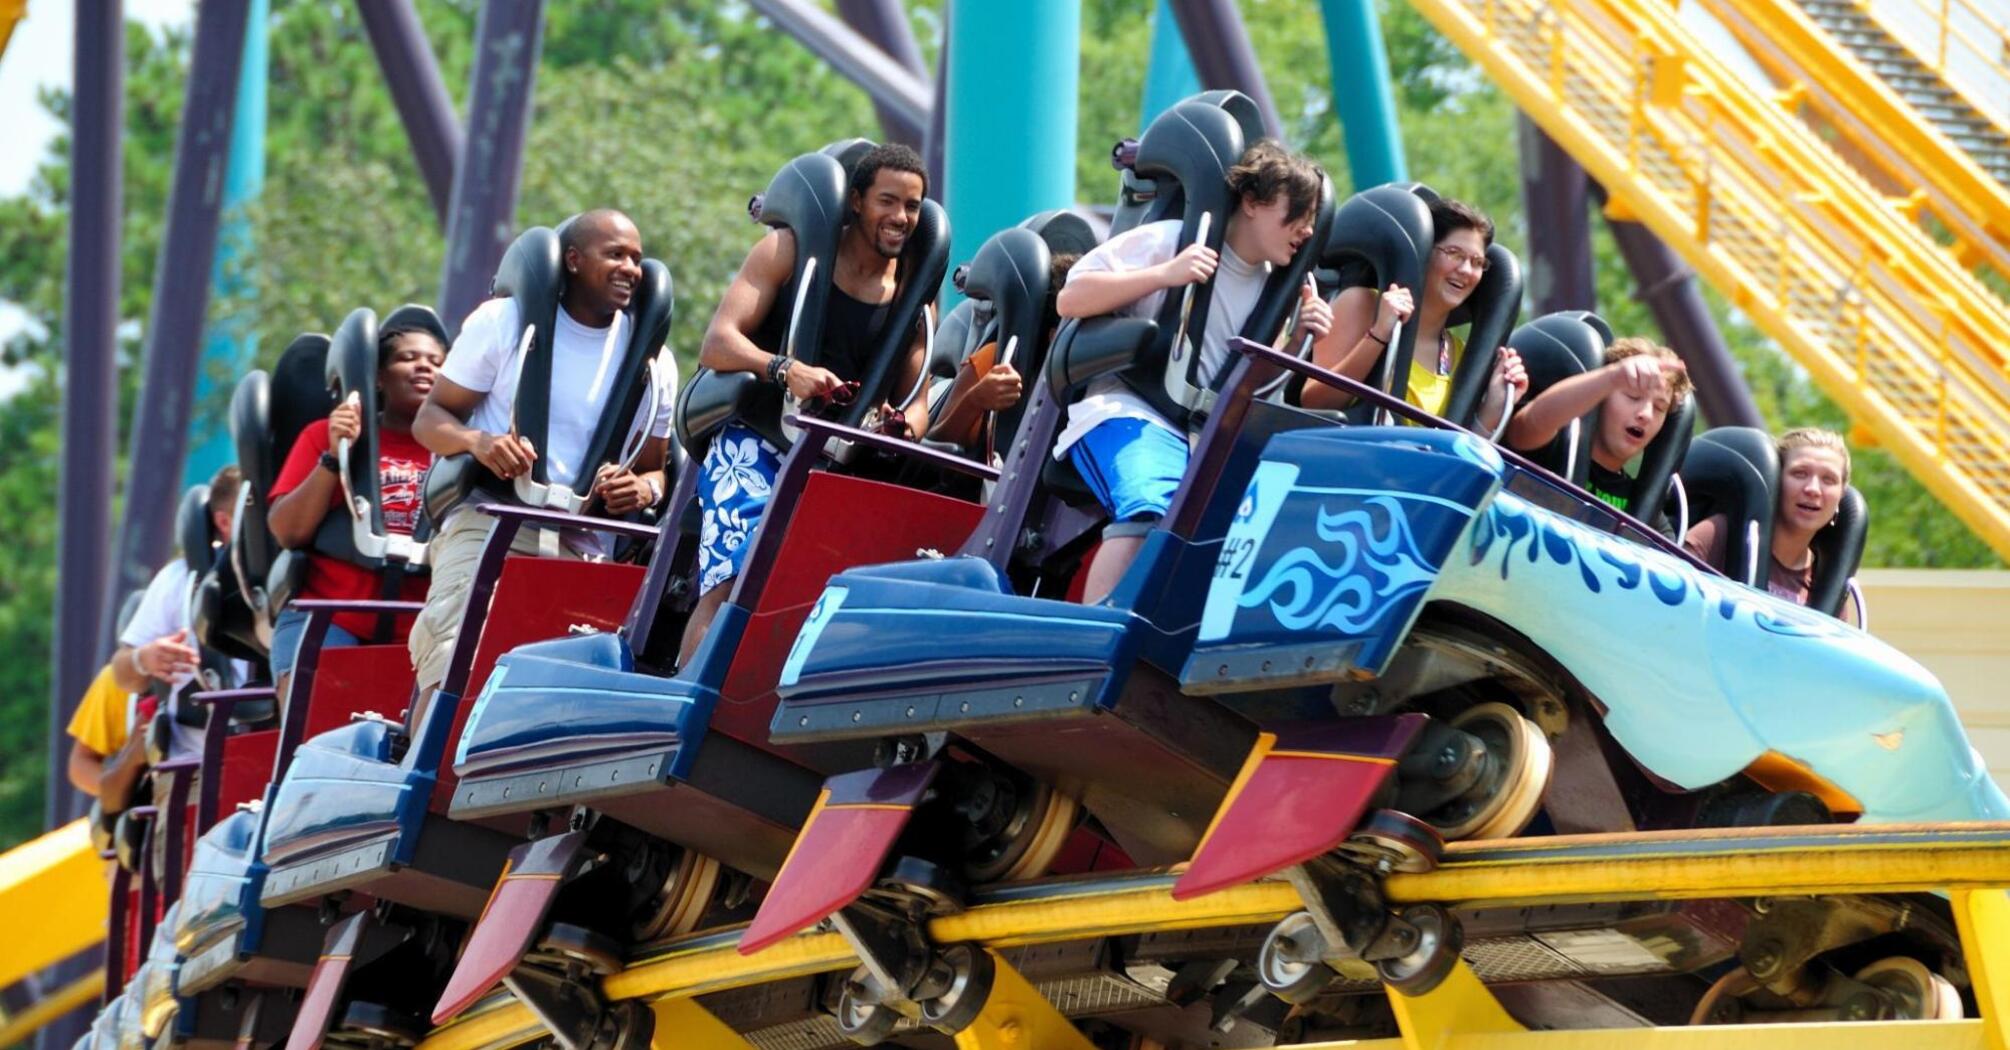 A group of people ride a roller coaster